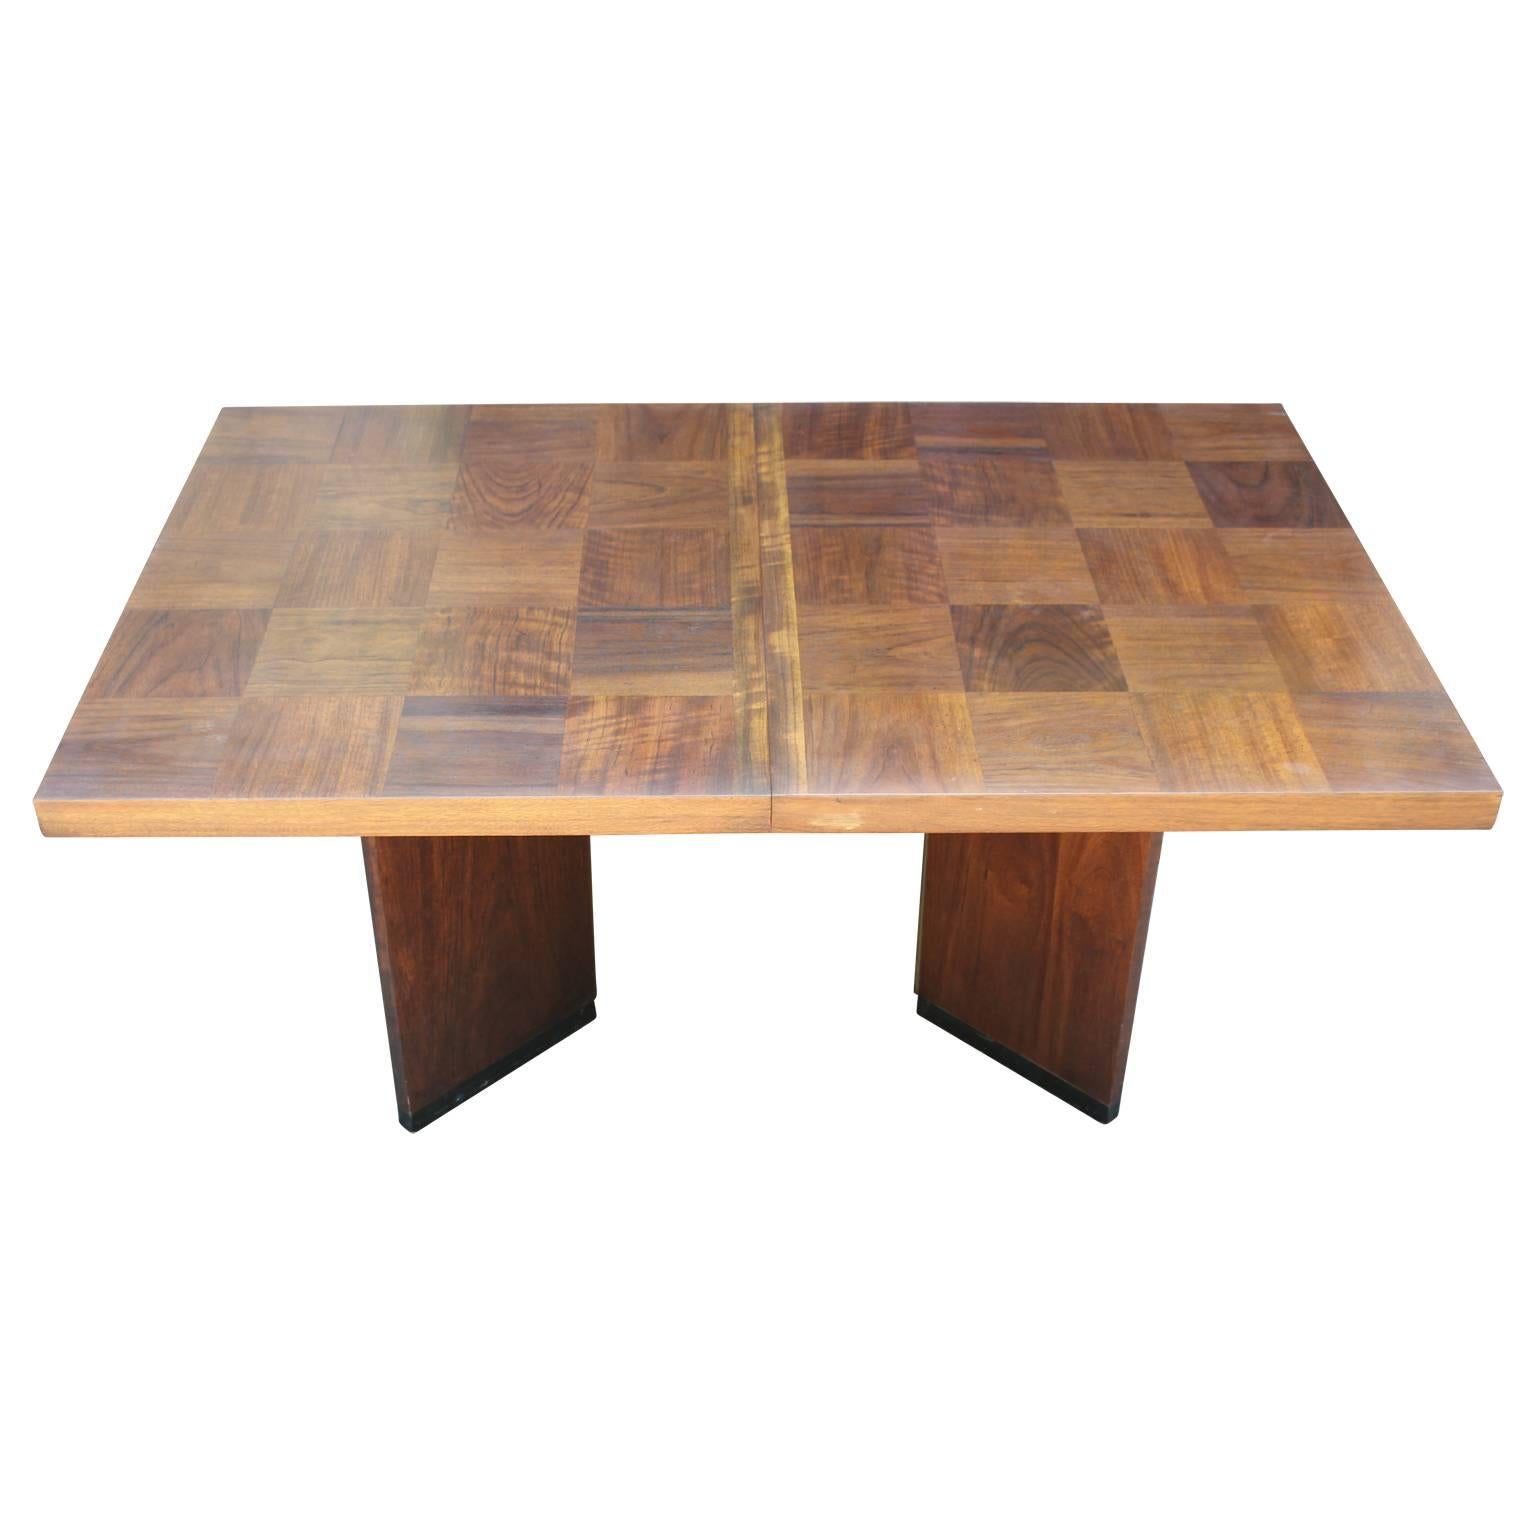 Mid-20th Century Modern Milo Baughman Style Walnut Parquetry Dining Table with Two Leaves